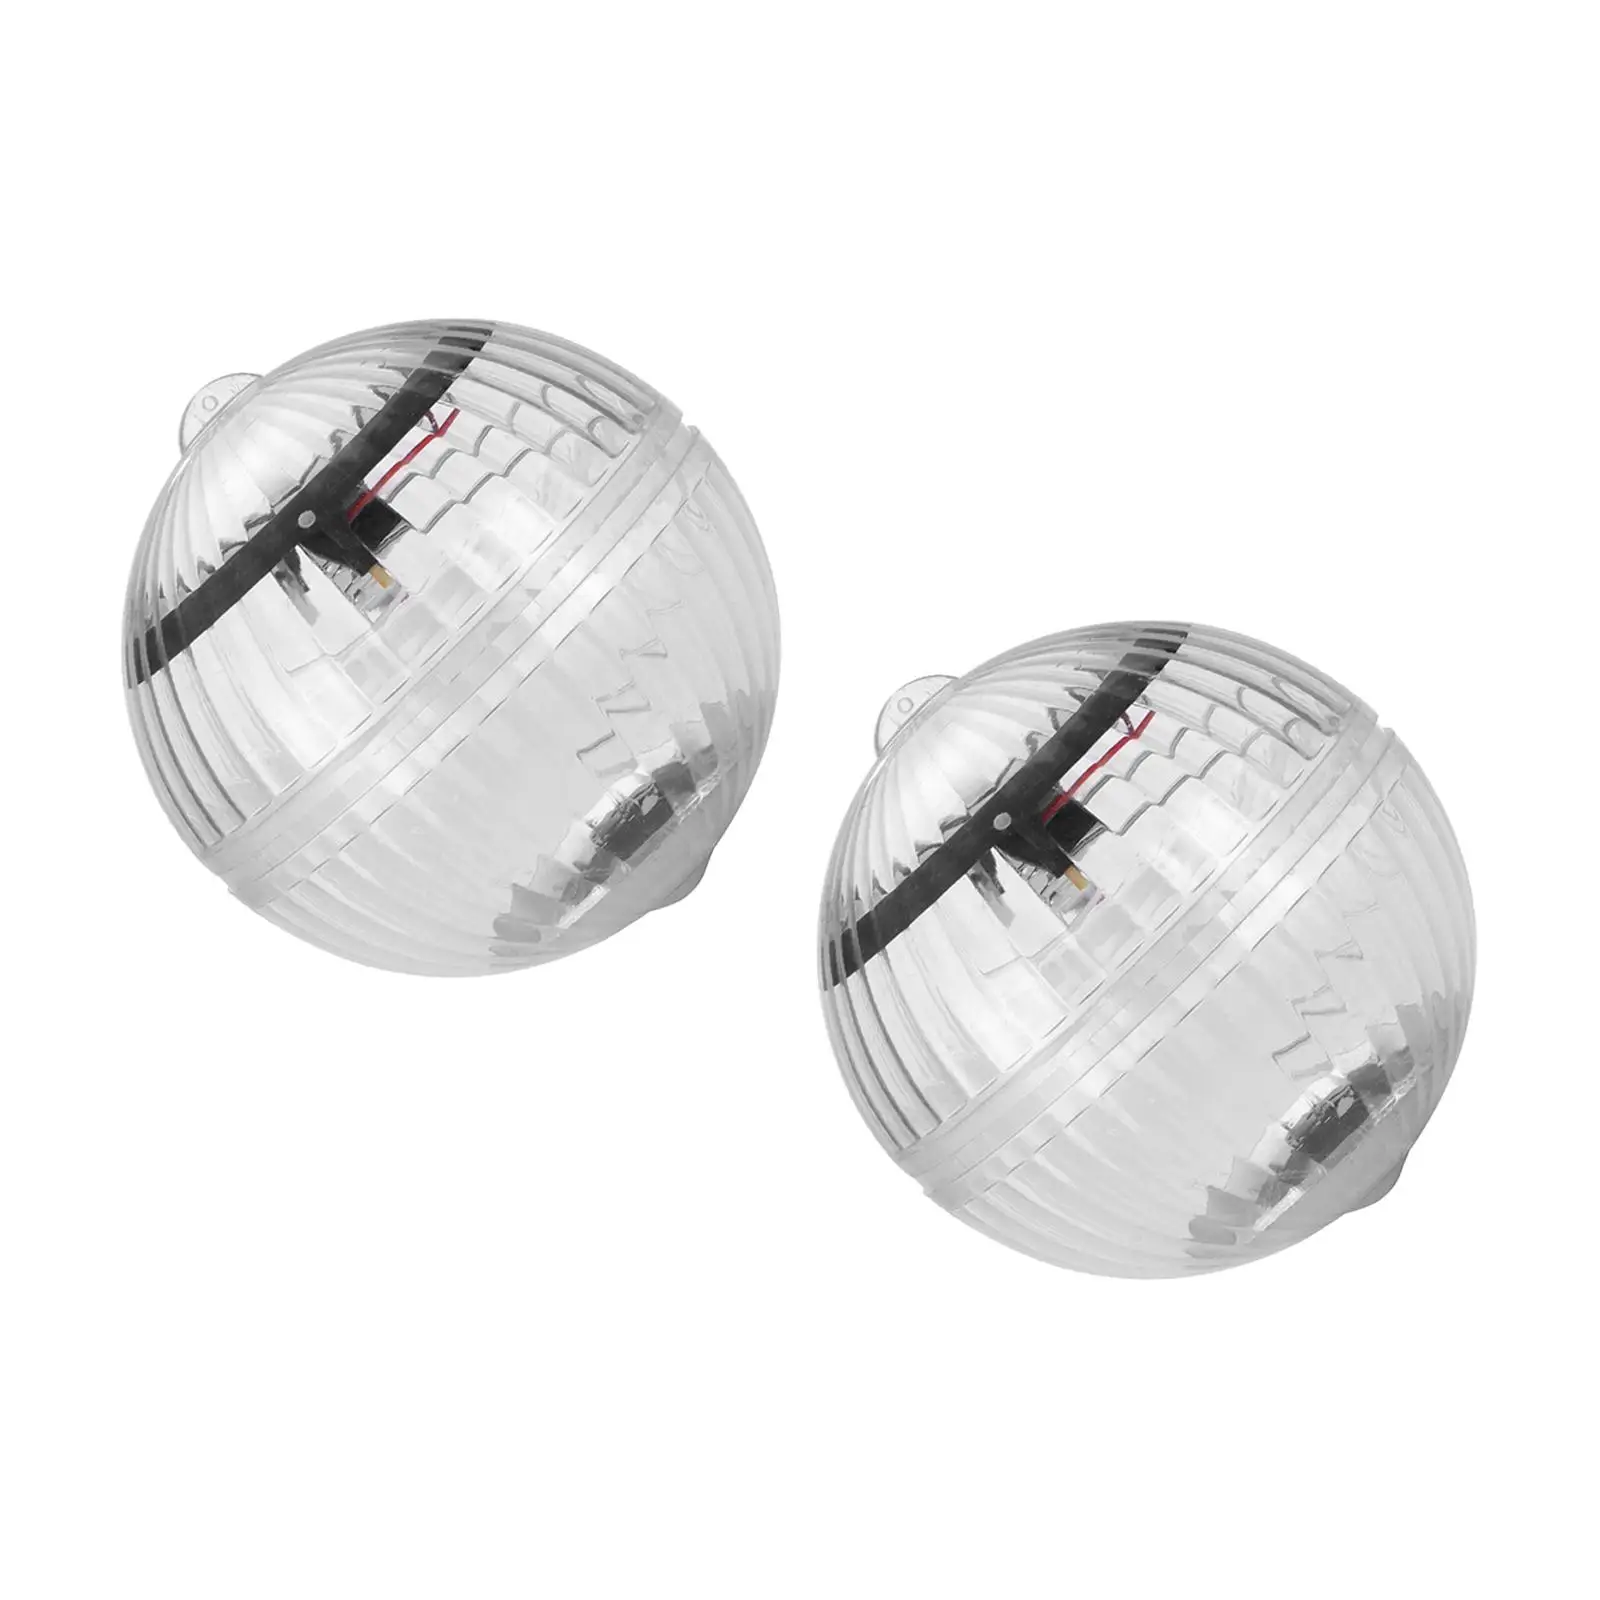 Pool Solar Floating Light Decoration Ball Lamp Garden Decorative Light Waterproof for Pathway Swimming Pool Pond Outdoor Lawn